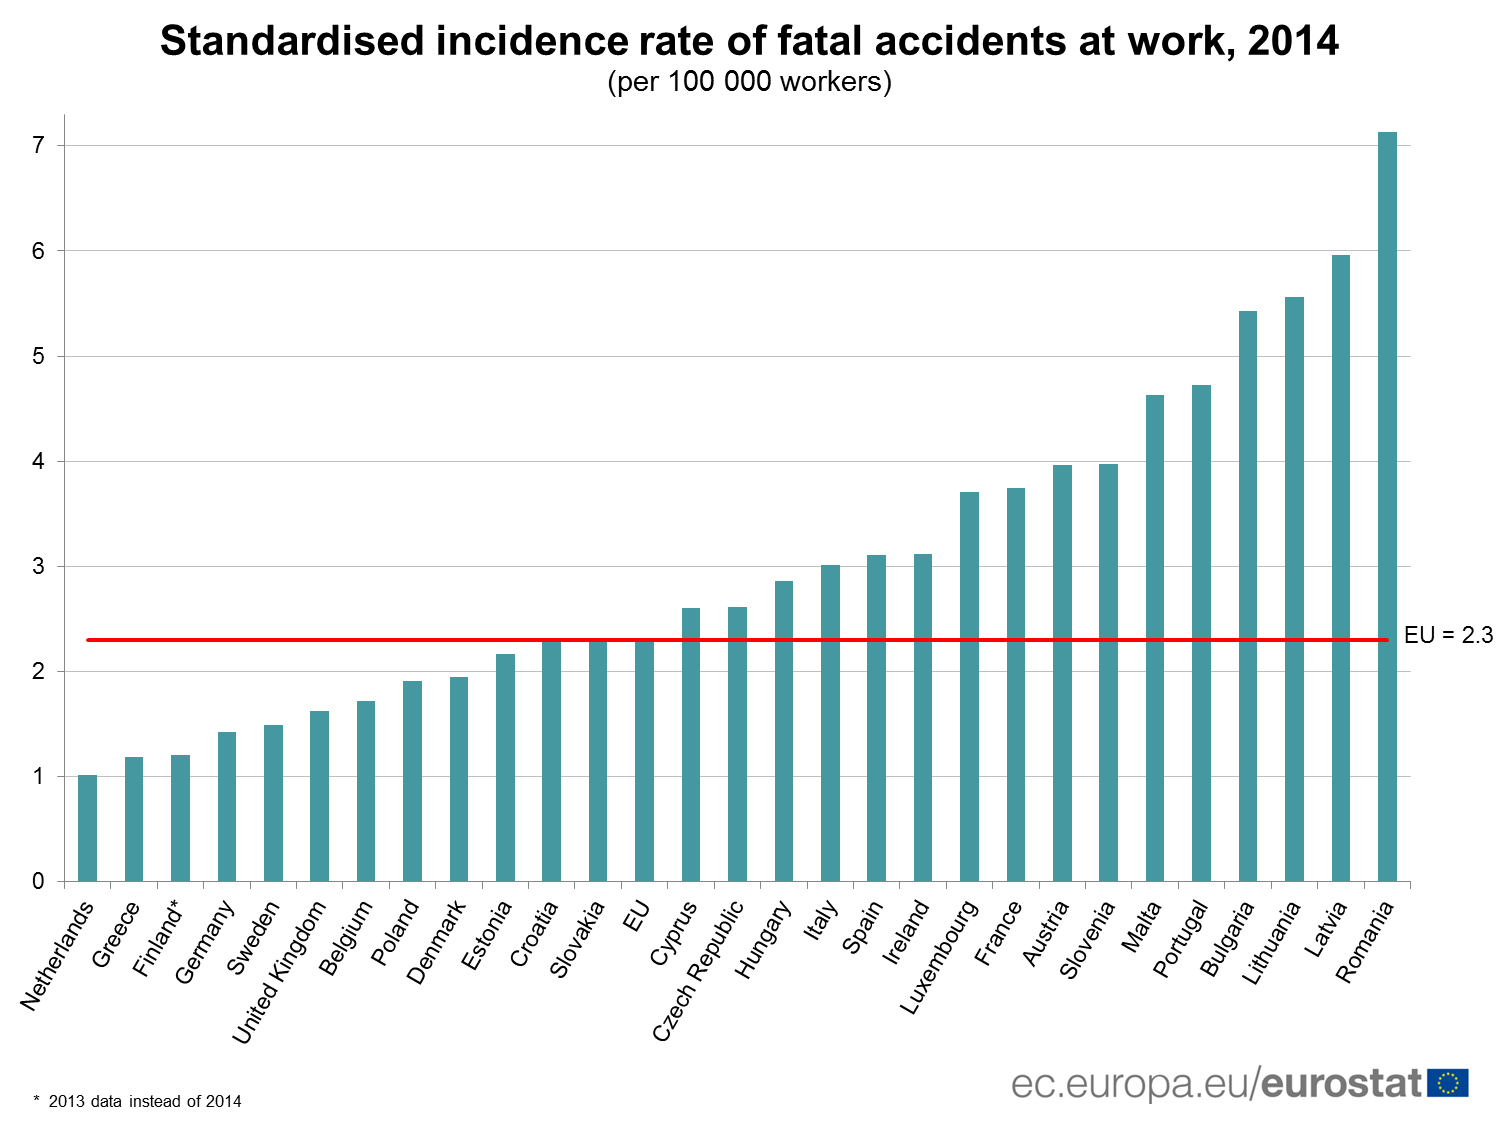 Fatal accidents at work within the European Union